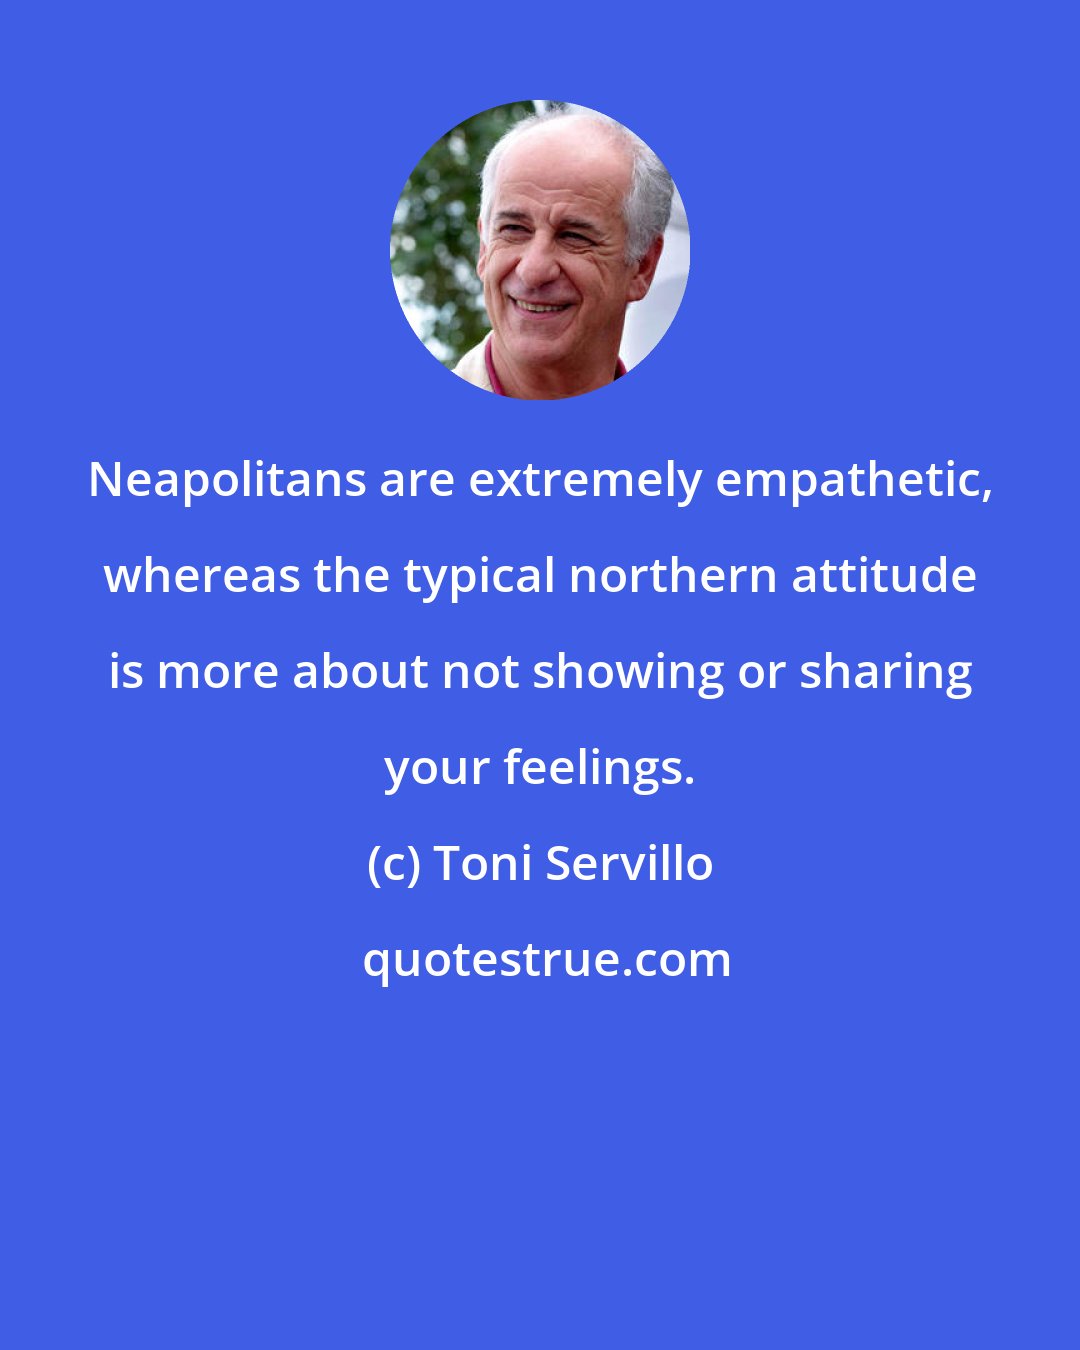 Toni Servillo: Neapolitans are extremely empathetic, whereas the typical northern attitude is more about not showing or sharing your feelings.